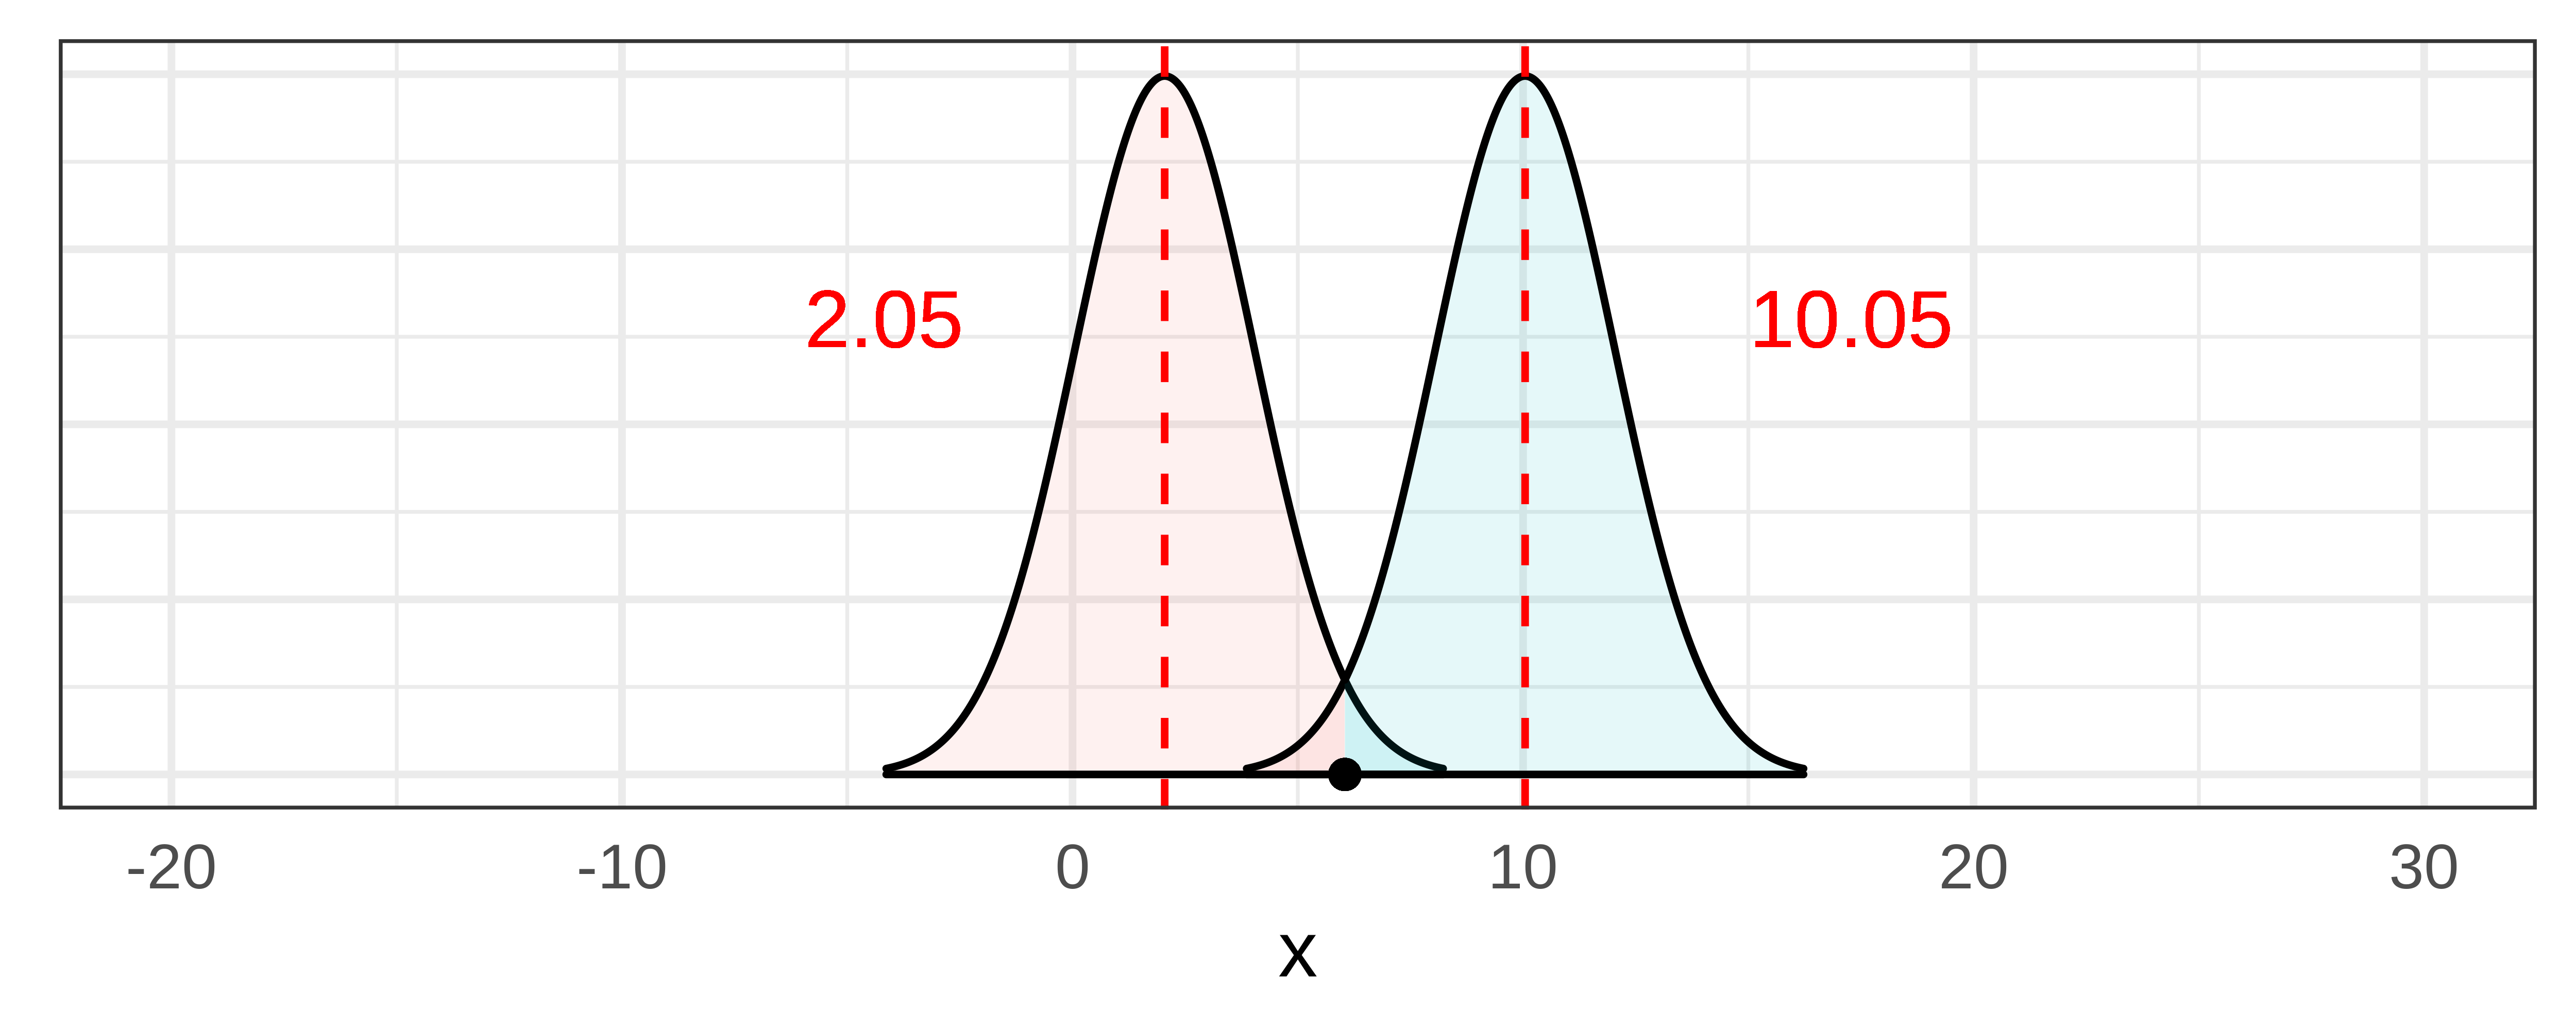 A histogram that depicts a 95 percent confidence interval, where the lower bound sampling distribution is centered at 2.05 and the upper bound distribution, centered at 10.05. The sample b1 of 6.05 falls in the center within the overlapping tails of the two distributions.